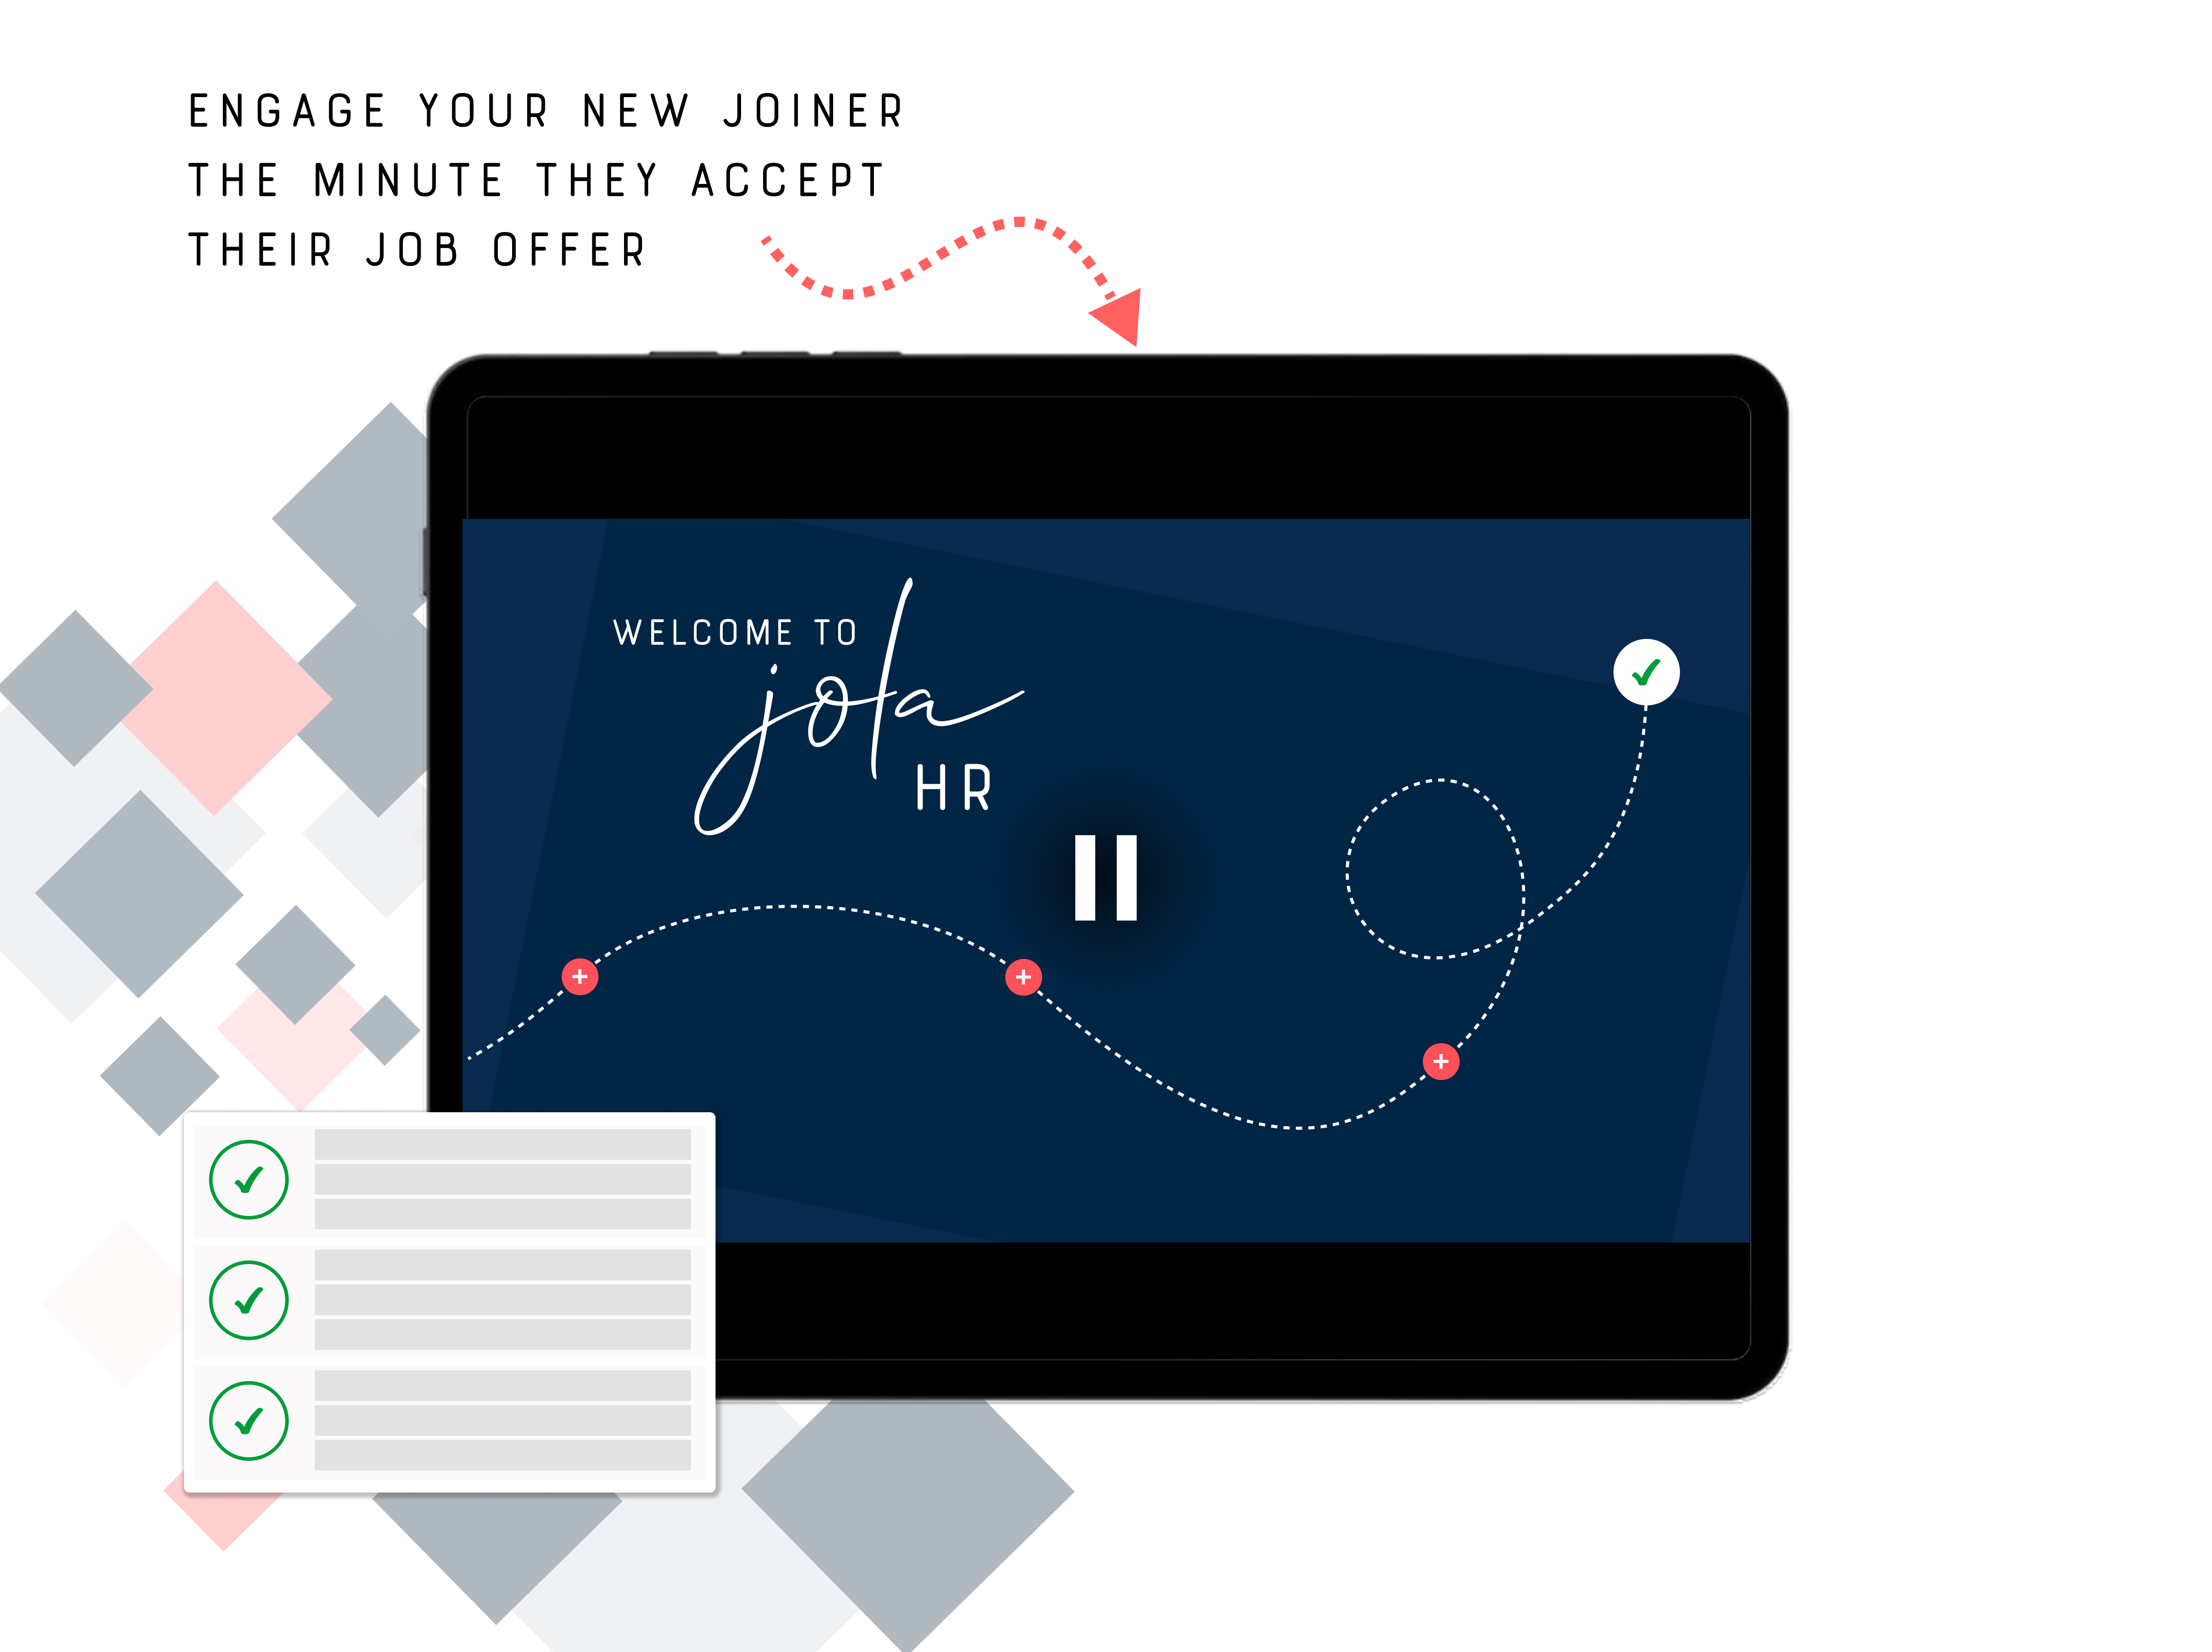 Engage your new joiners from day 1 with engaging and personalised content